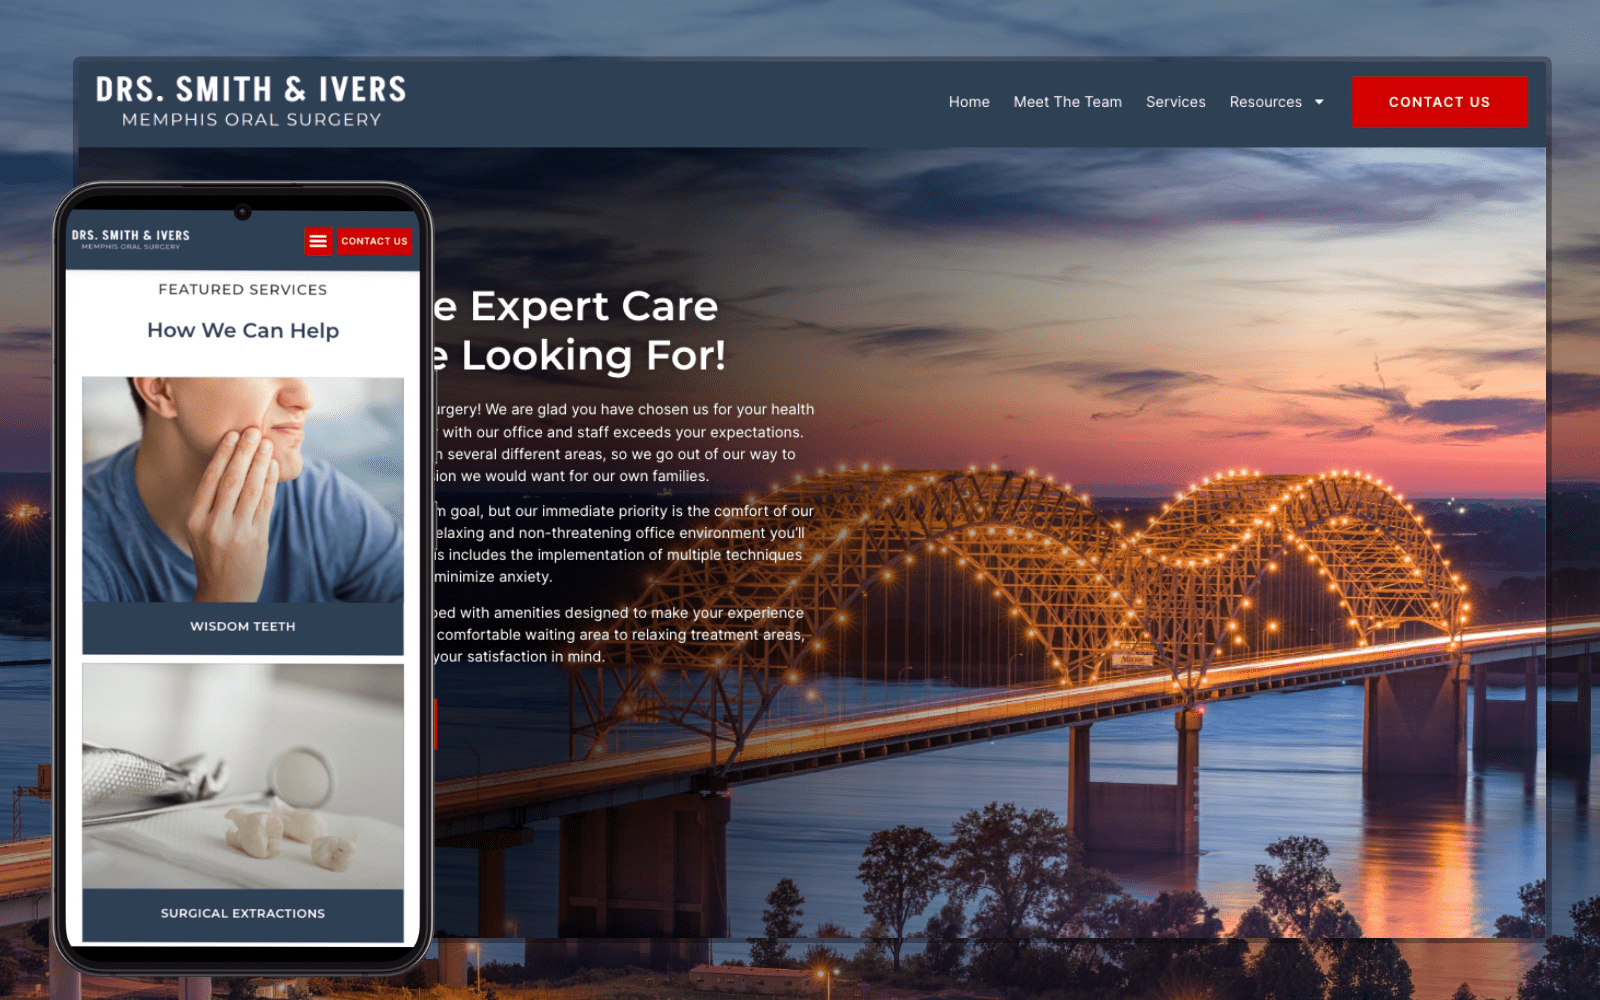 A sleek and professional website design tailored for a medical practice, featuring a clean layout and easy navigation.